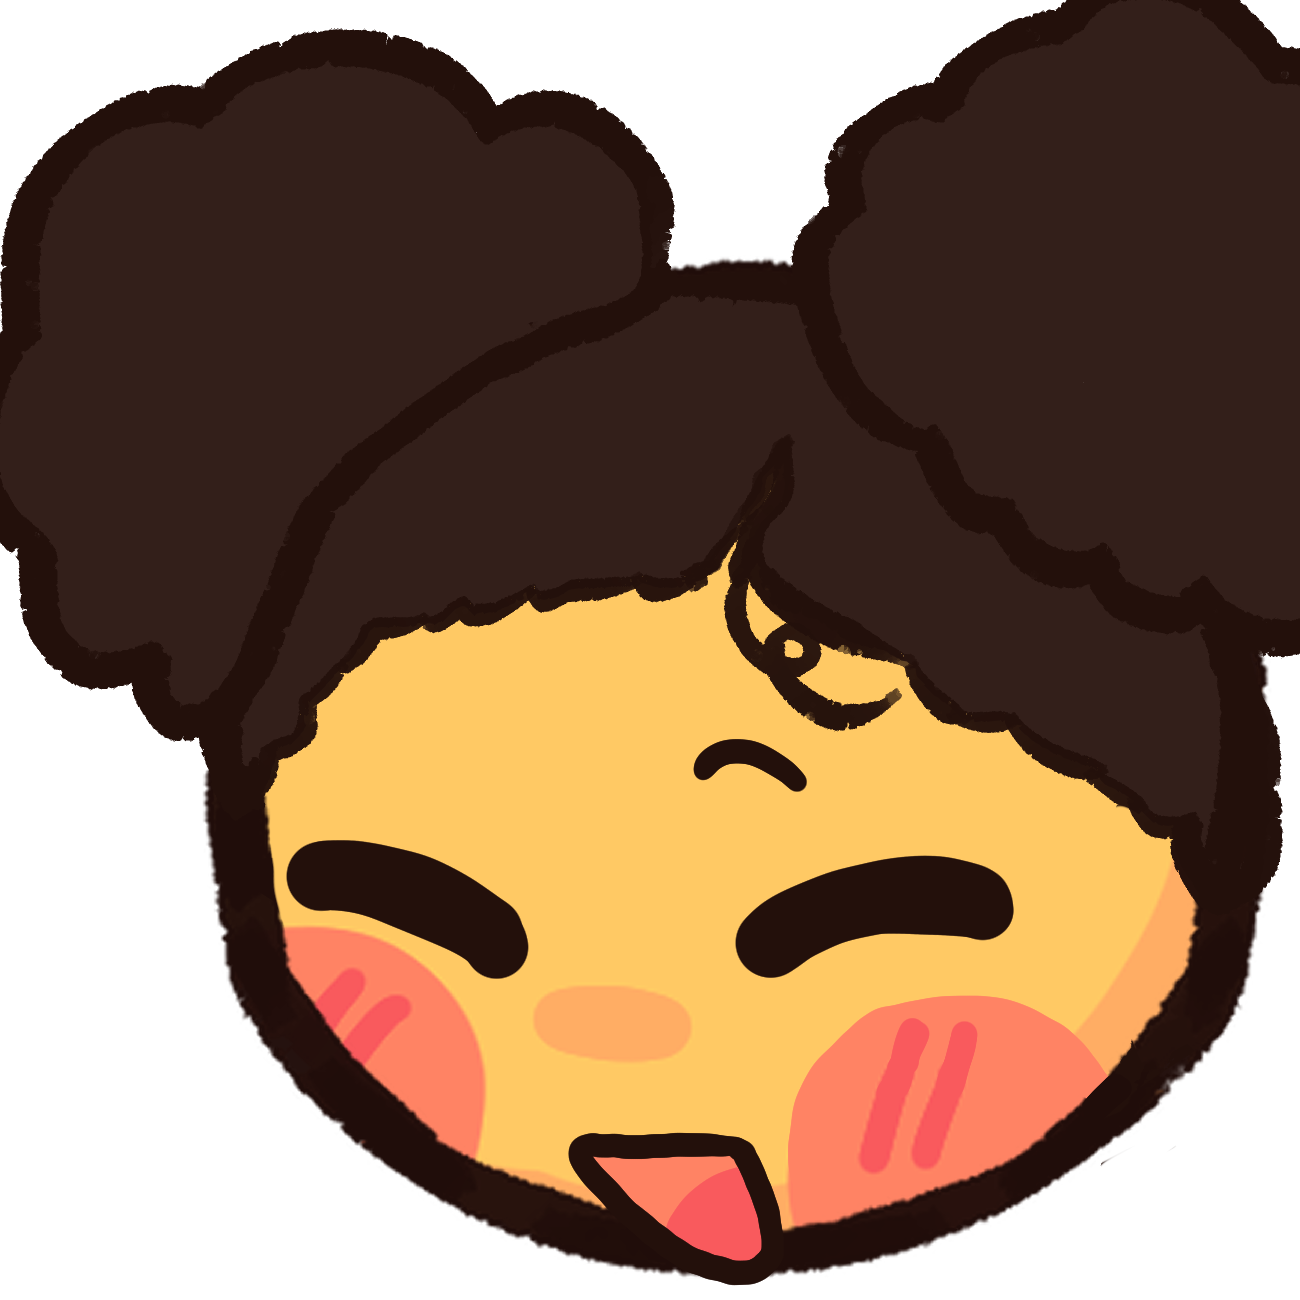 an emoji yellow person with dark box afro puffs smiling widly, their mouth open.